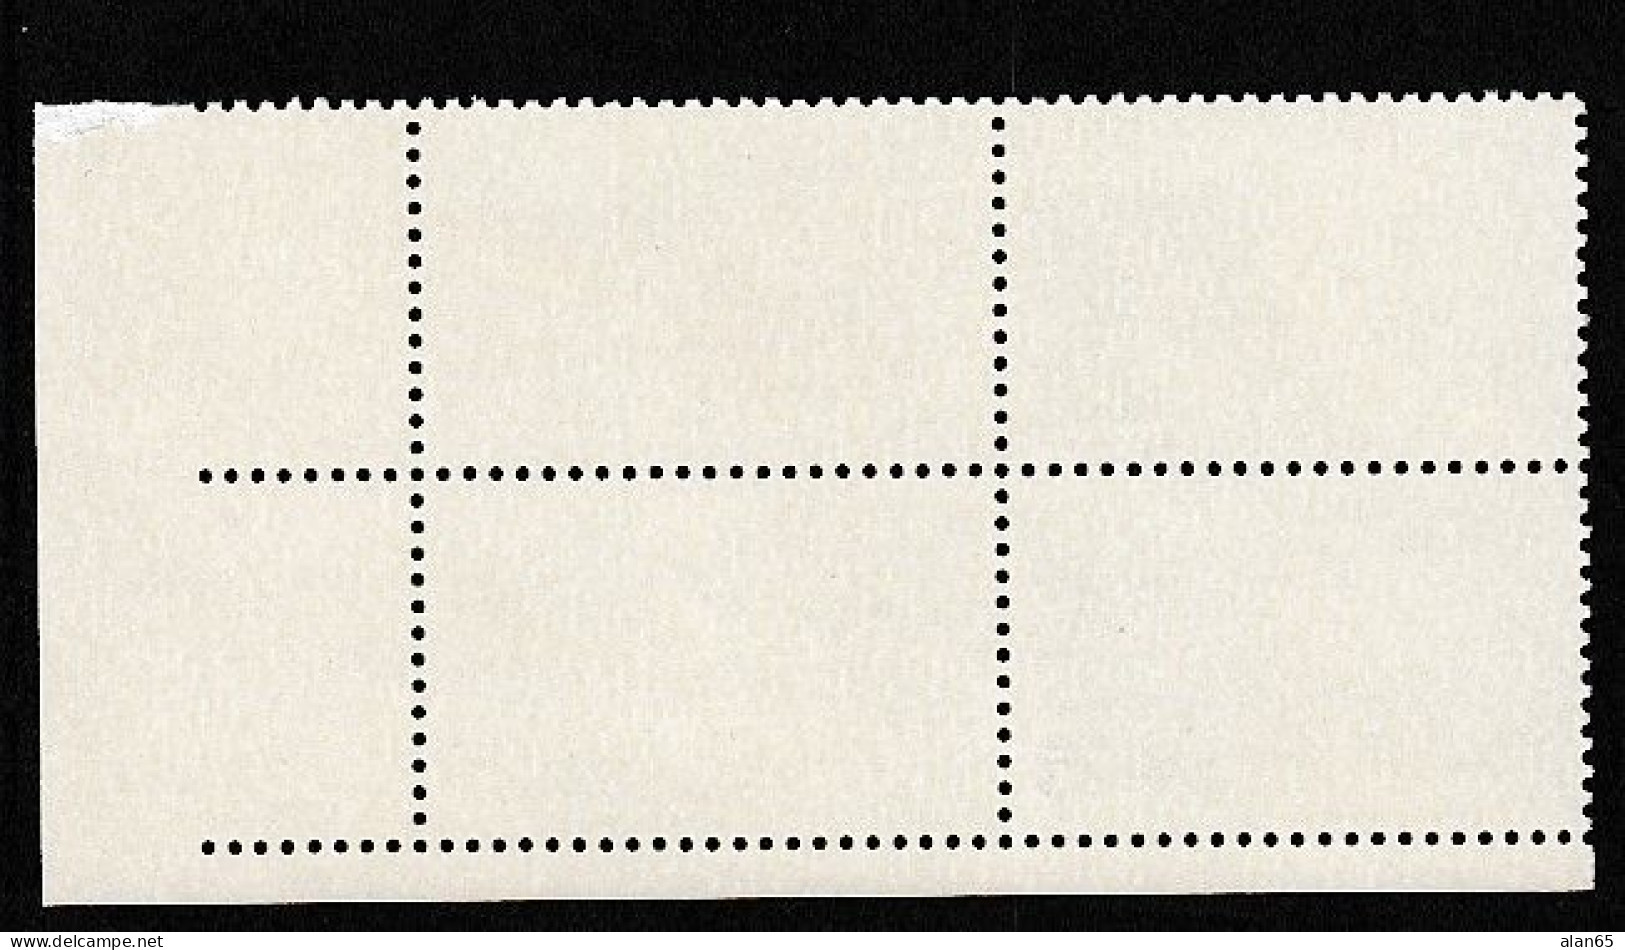 Sc#2506-2507, Micronesia & Marshall Islands, 25-cent 1990 Issue, Plate # Block Of 4 MNH US Postage Stamps - Numéros De Planches